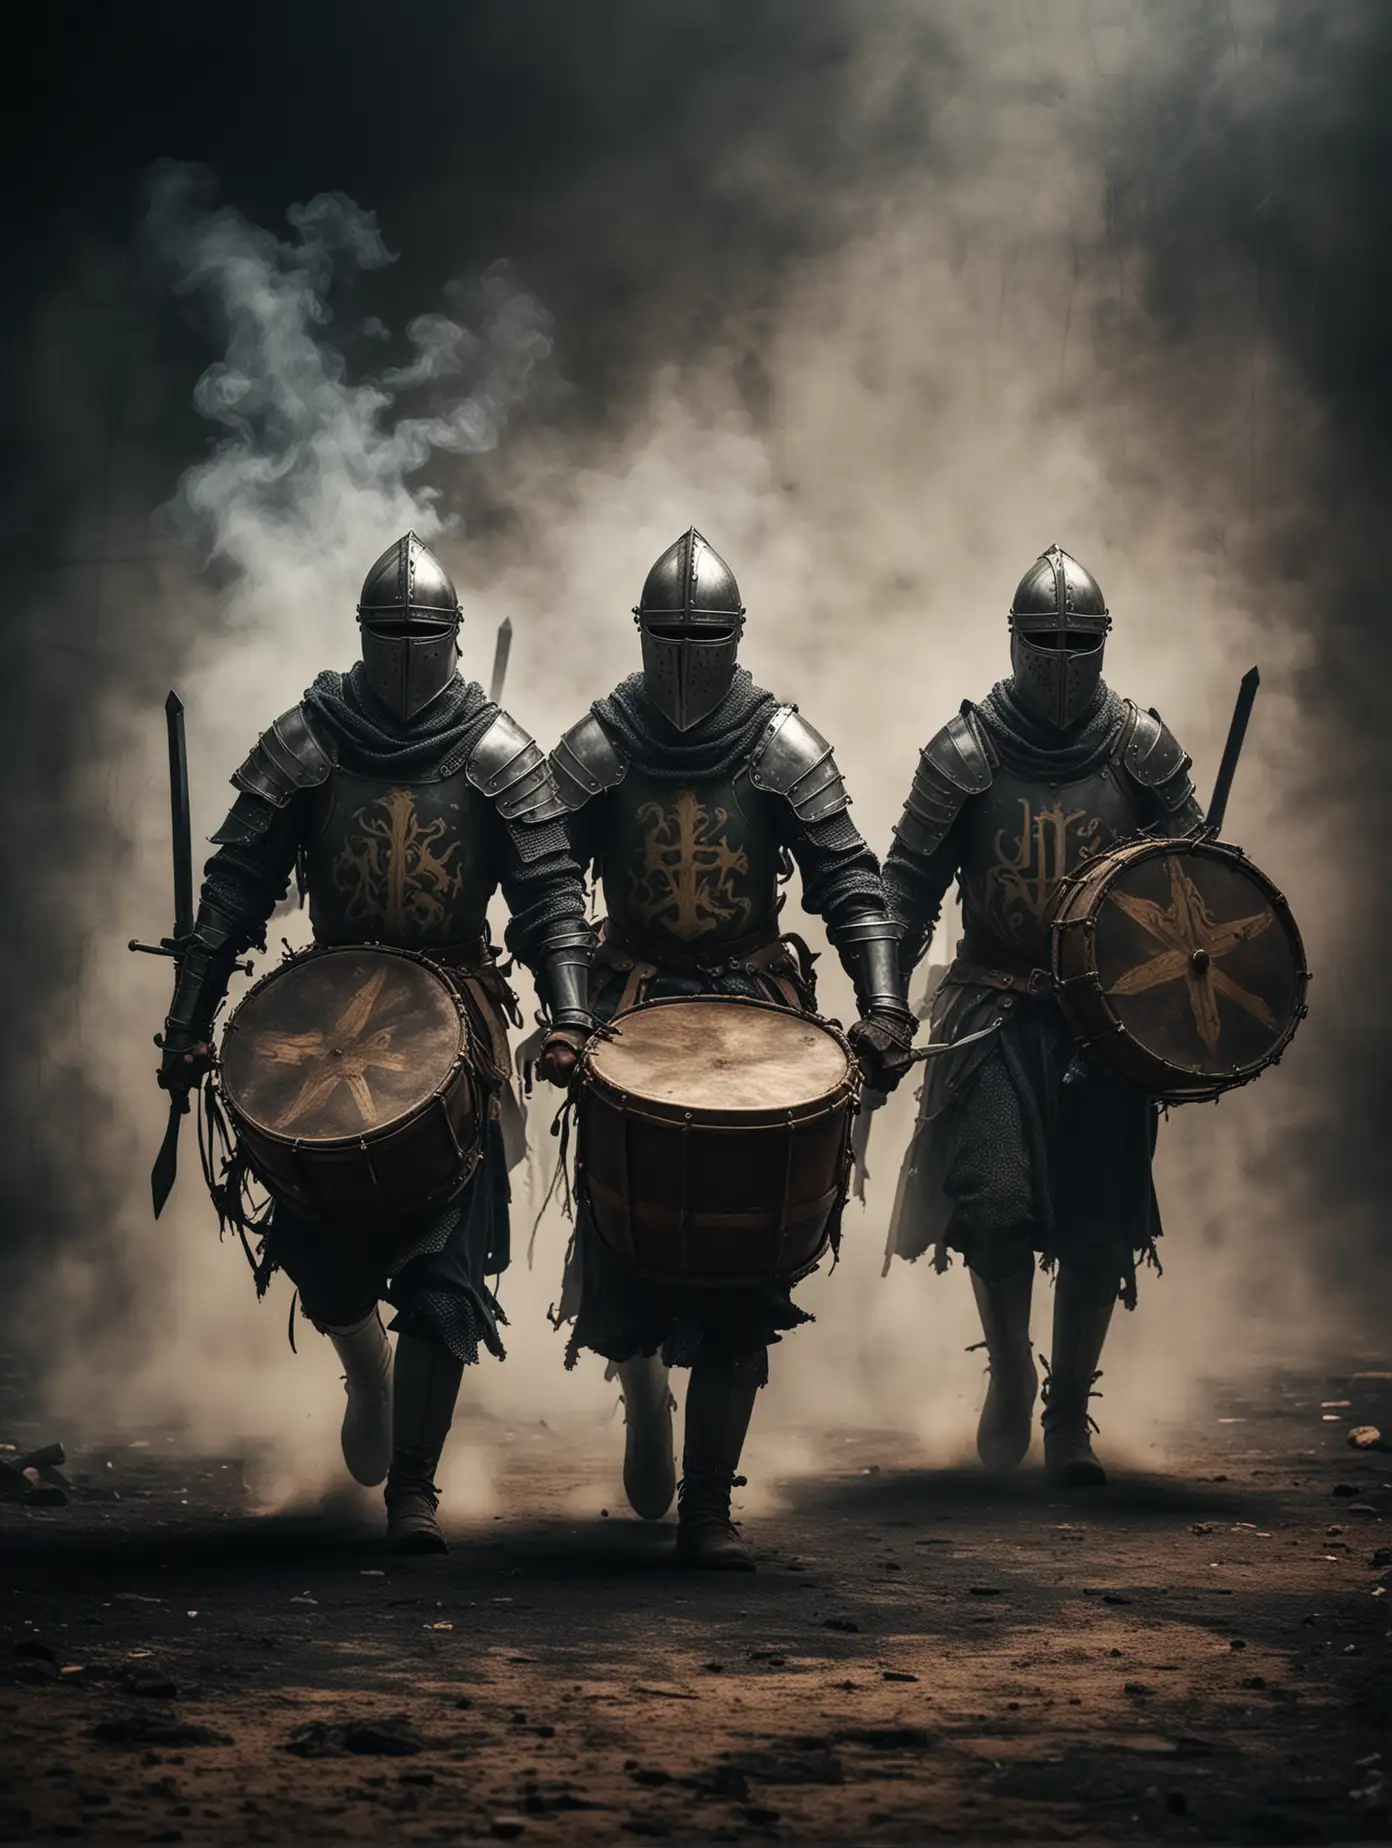 Medieval Knights Marching into Battle Drummers and Swordsmen Amidst Smoke